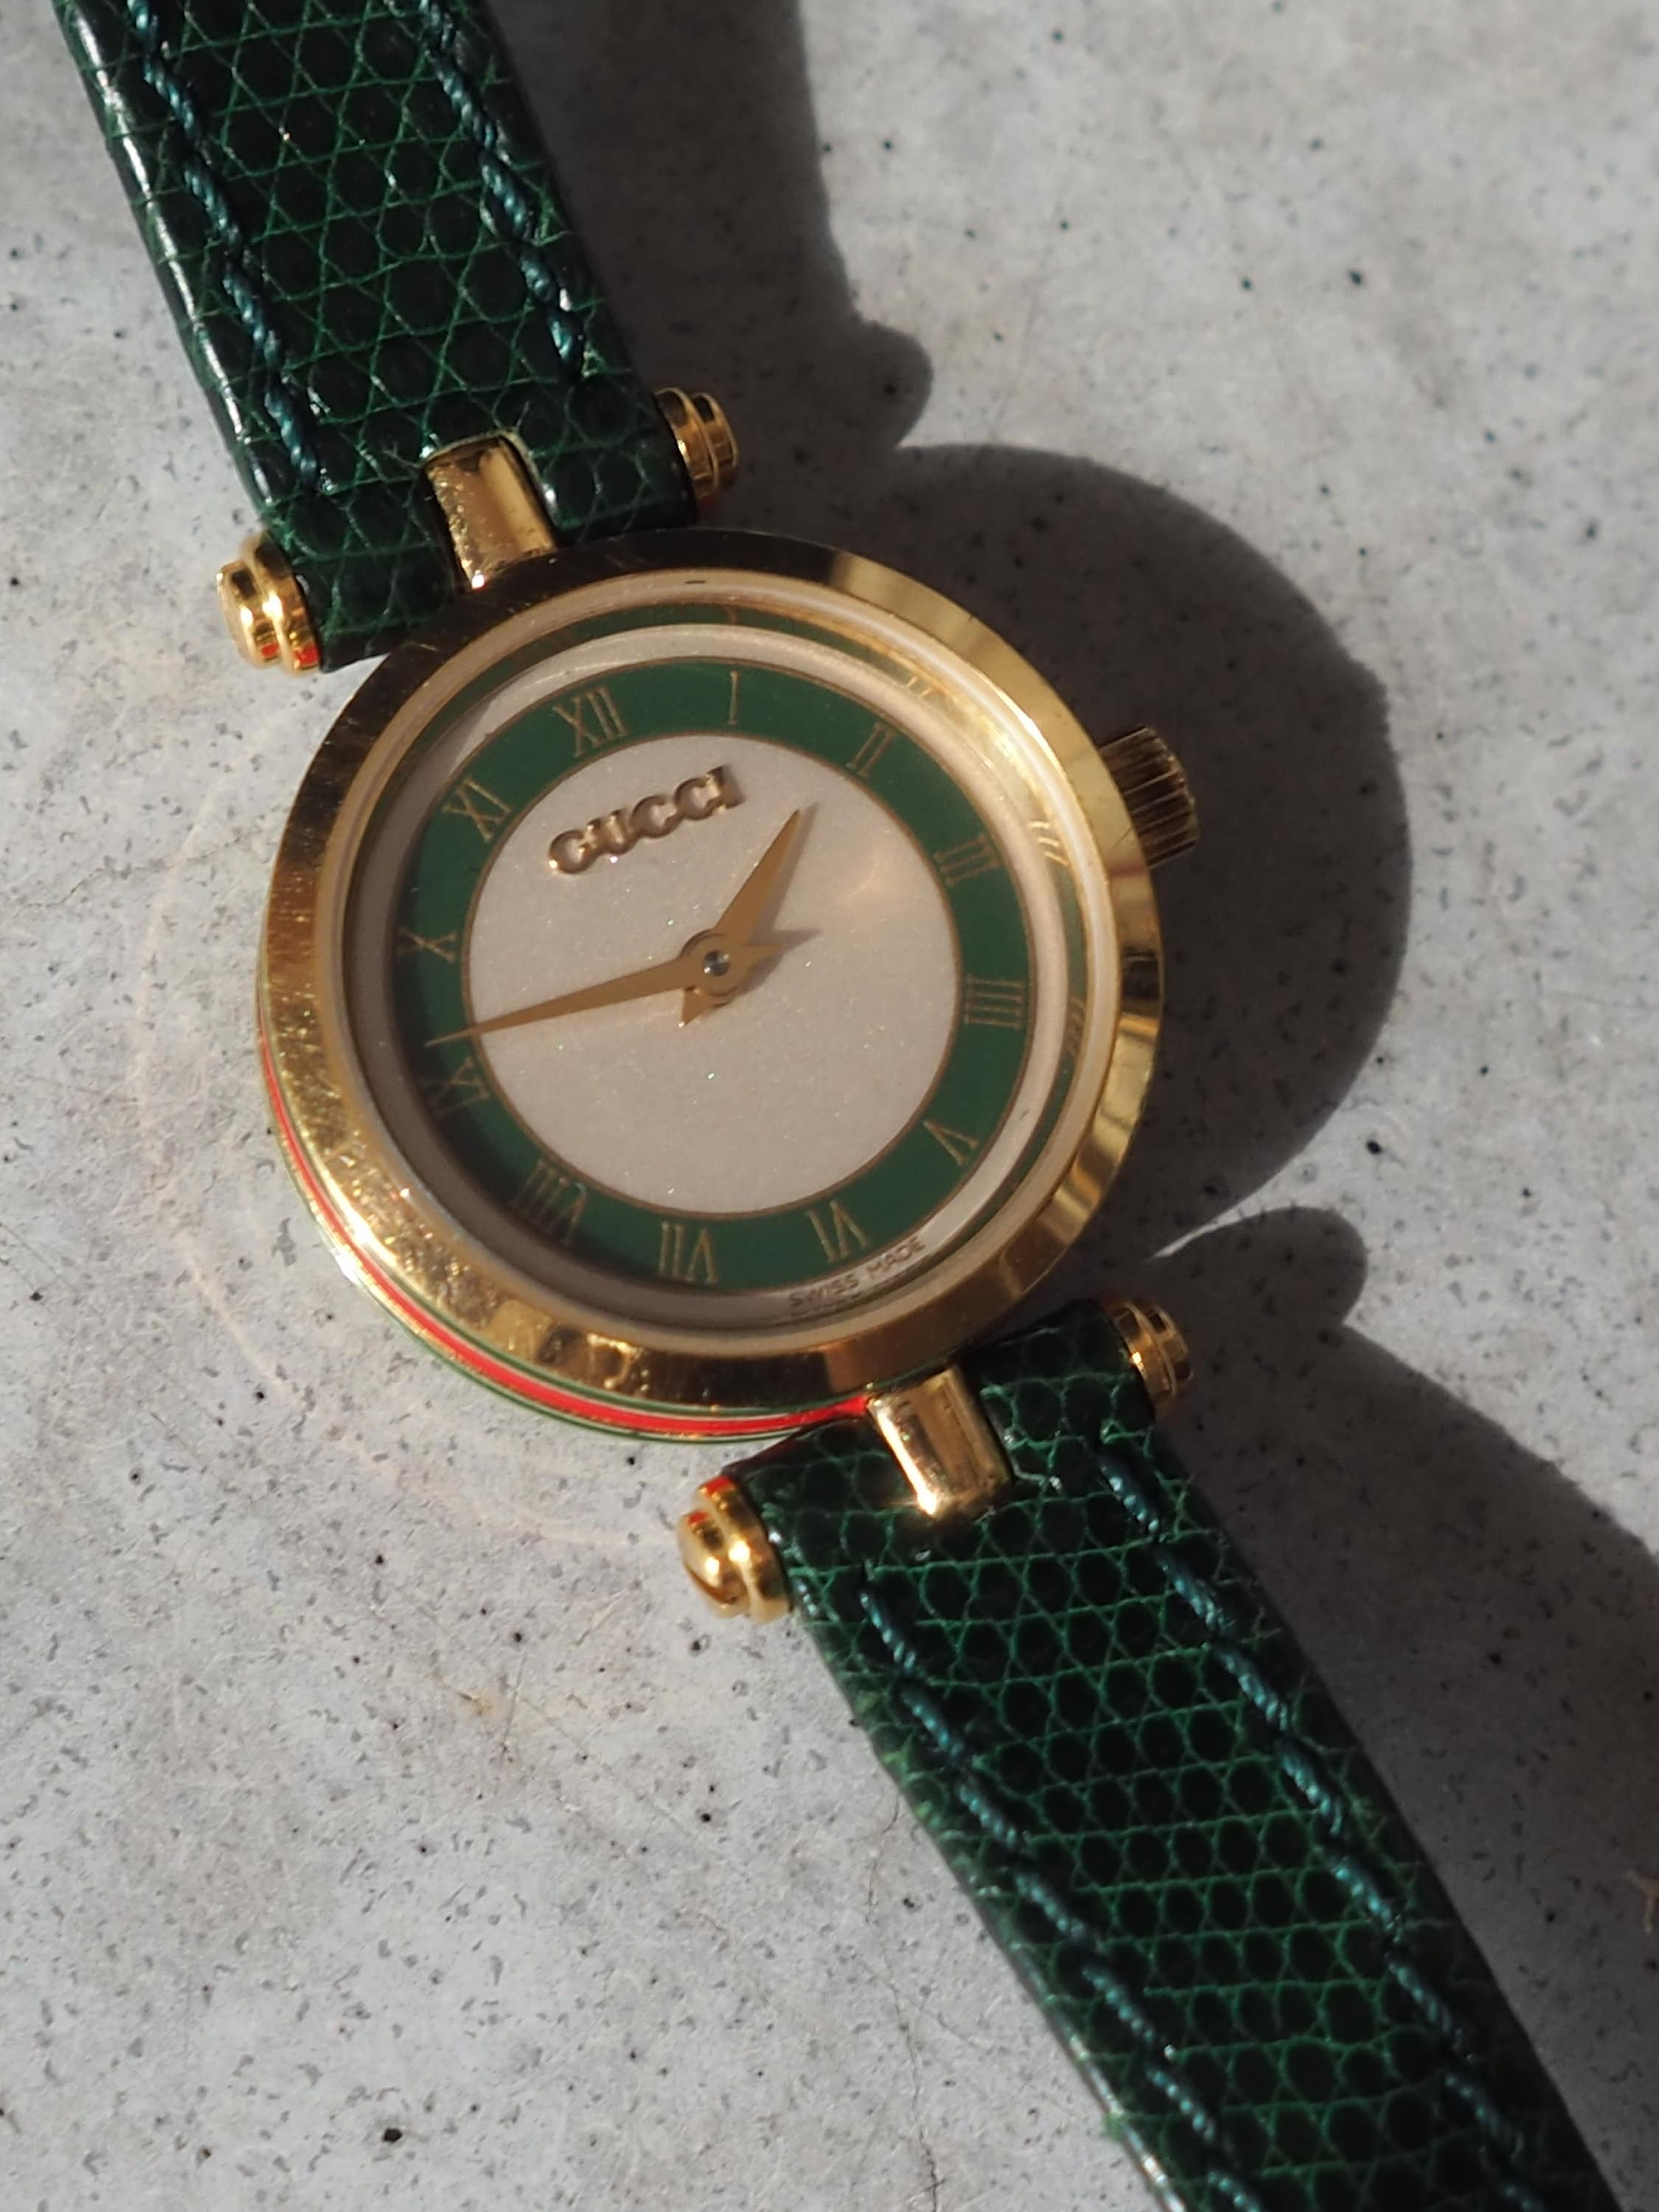 GUCCI Shelly Watch Wristwatch Gold Metal Green Leather Vintage Authentic